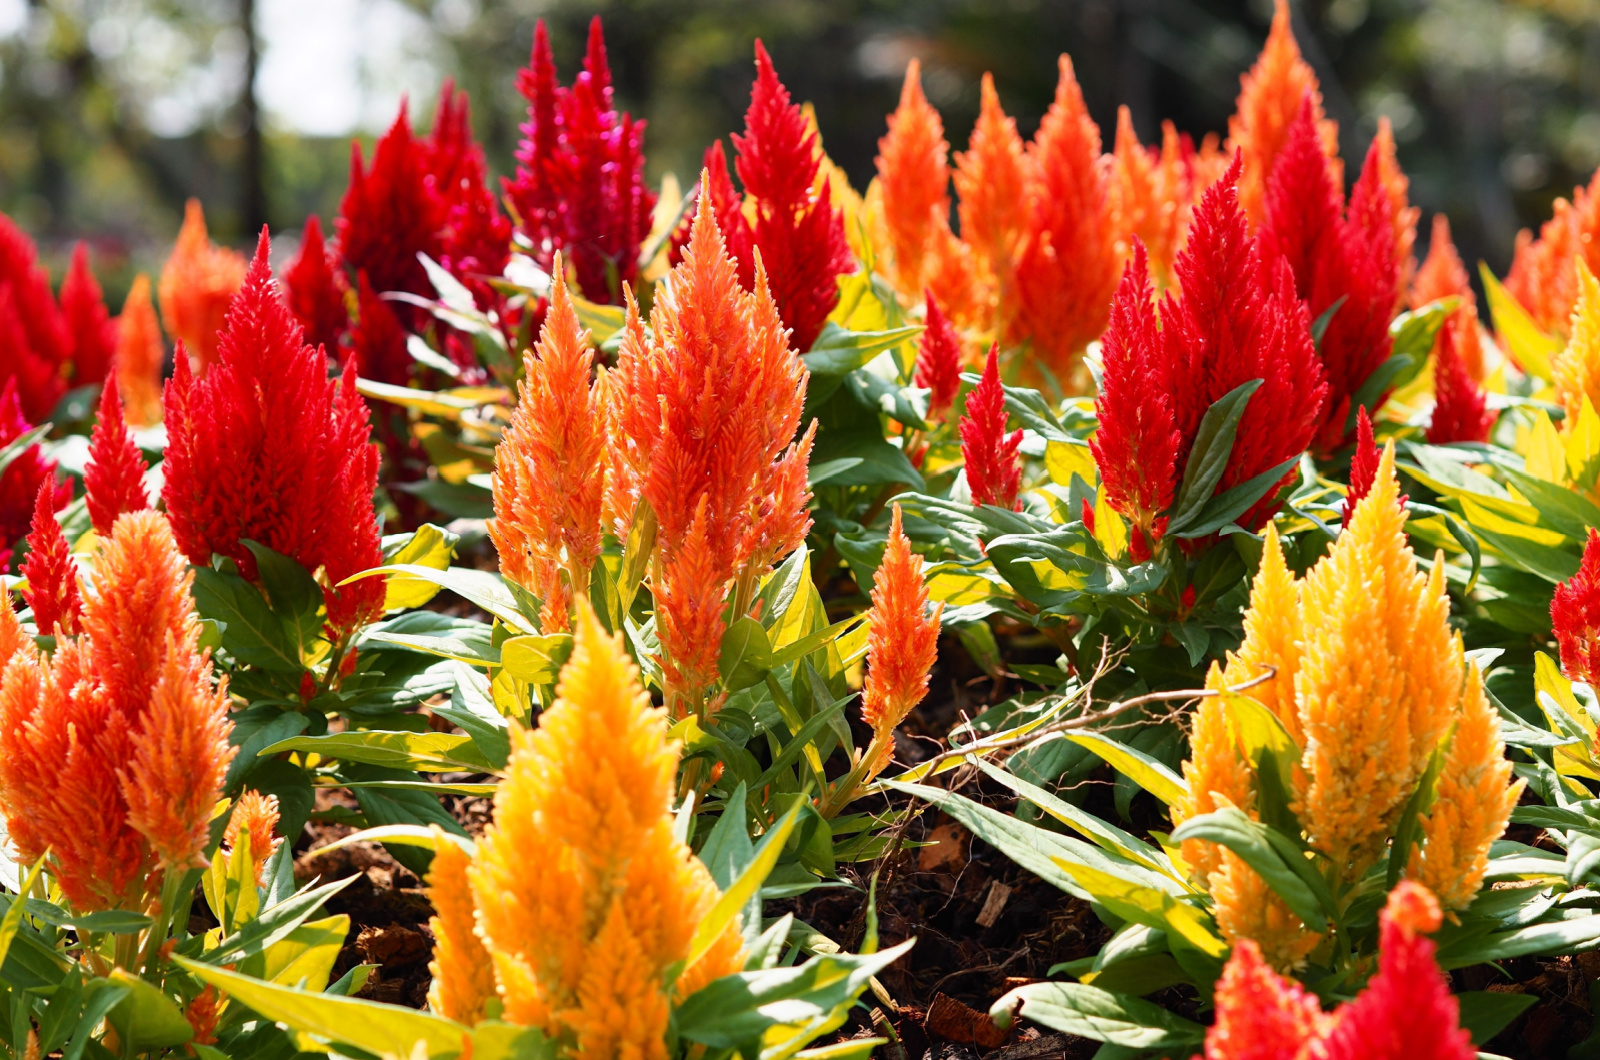 Bright orange flowerheads of the feather celosia plant